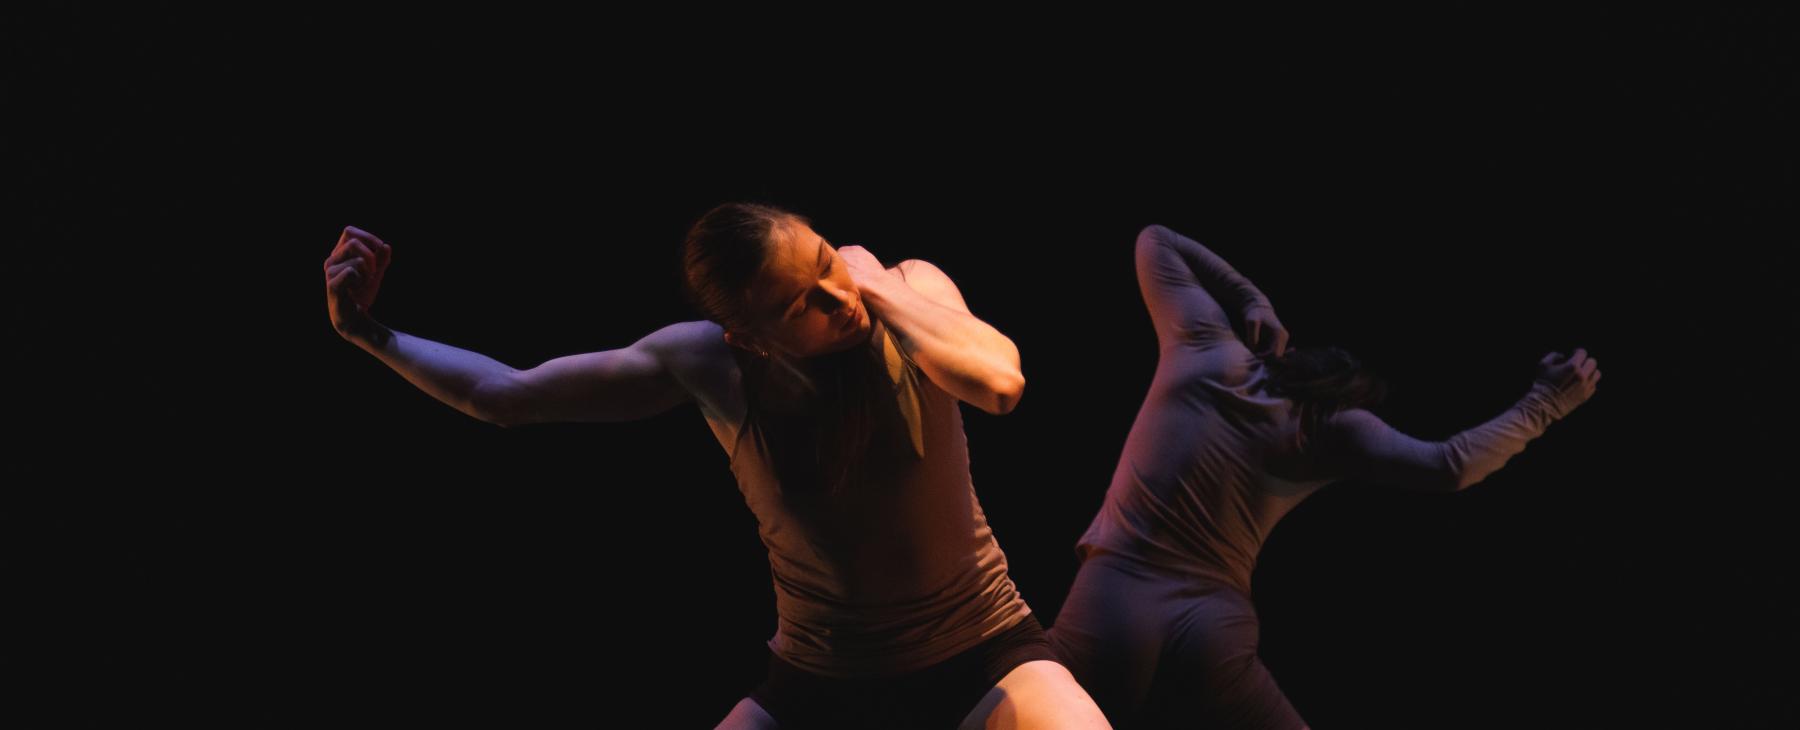 Two dancers mirror each other's movements, with the dancer in the foreground in a spotlight.